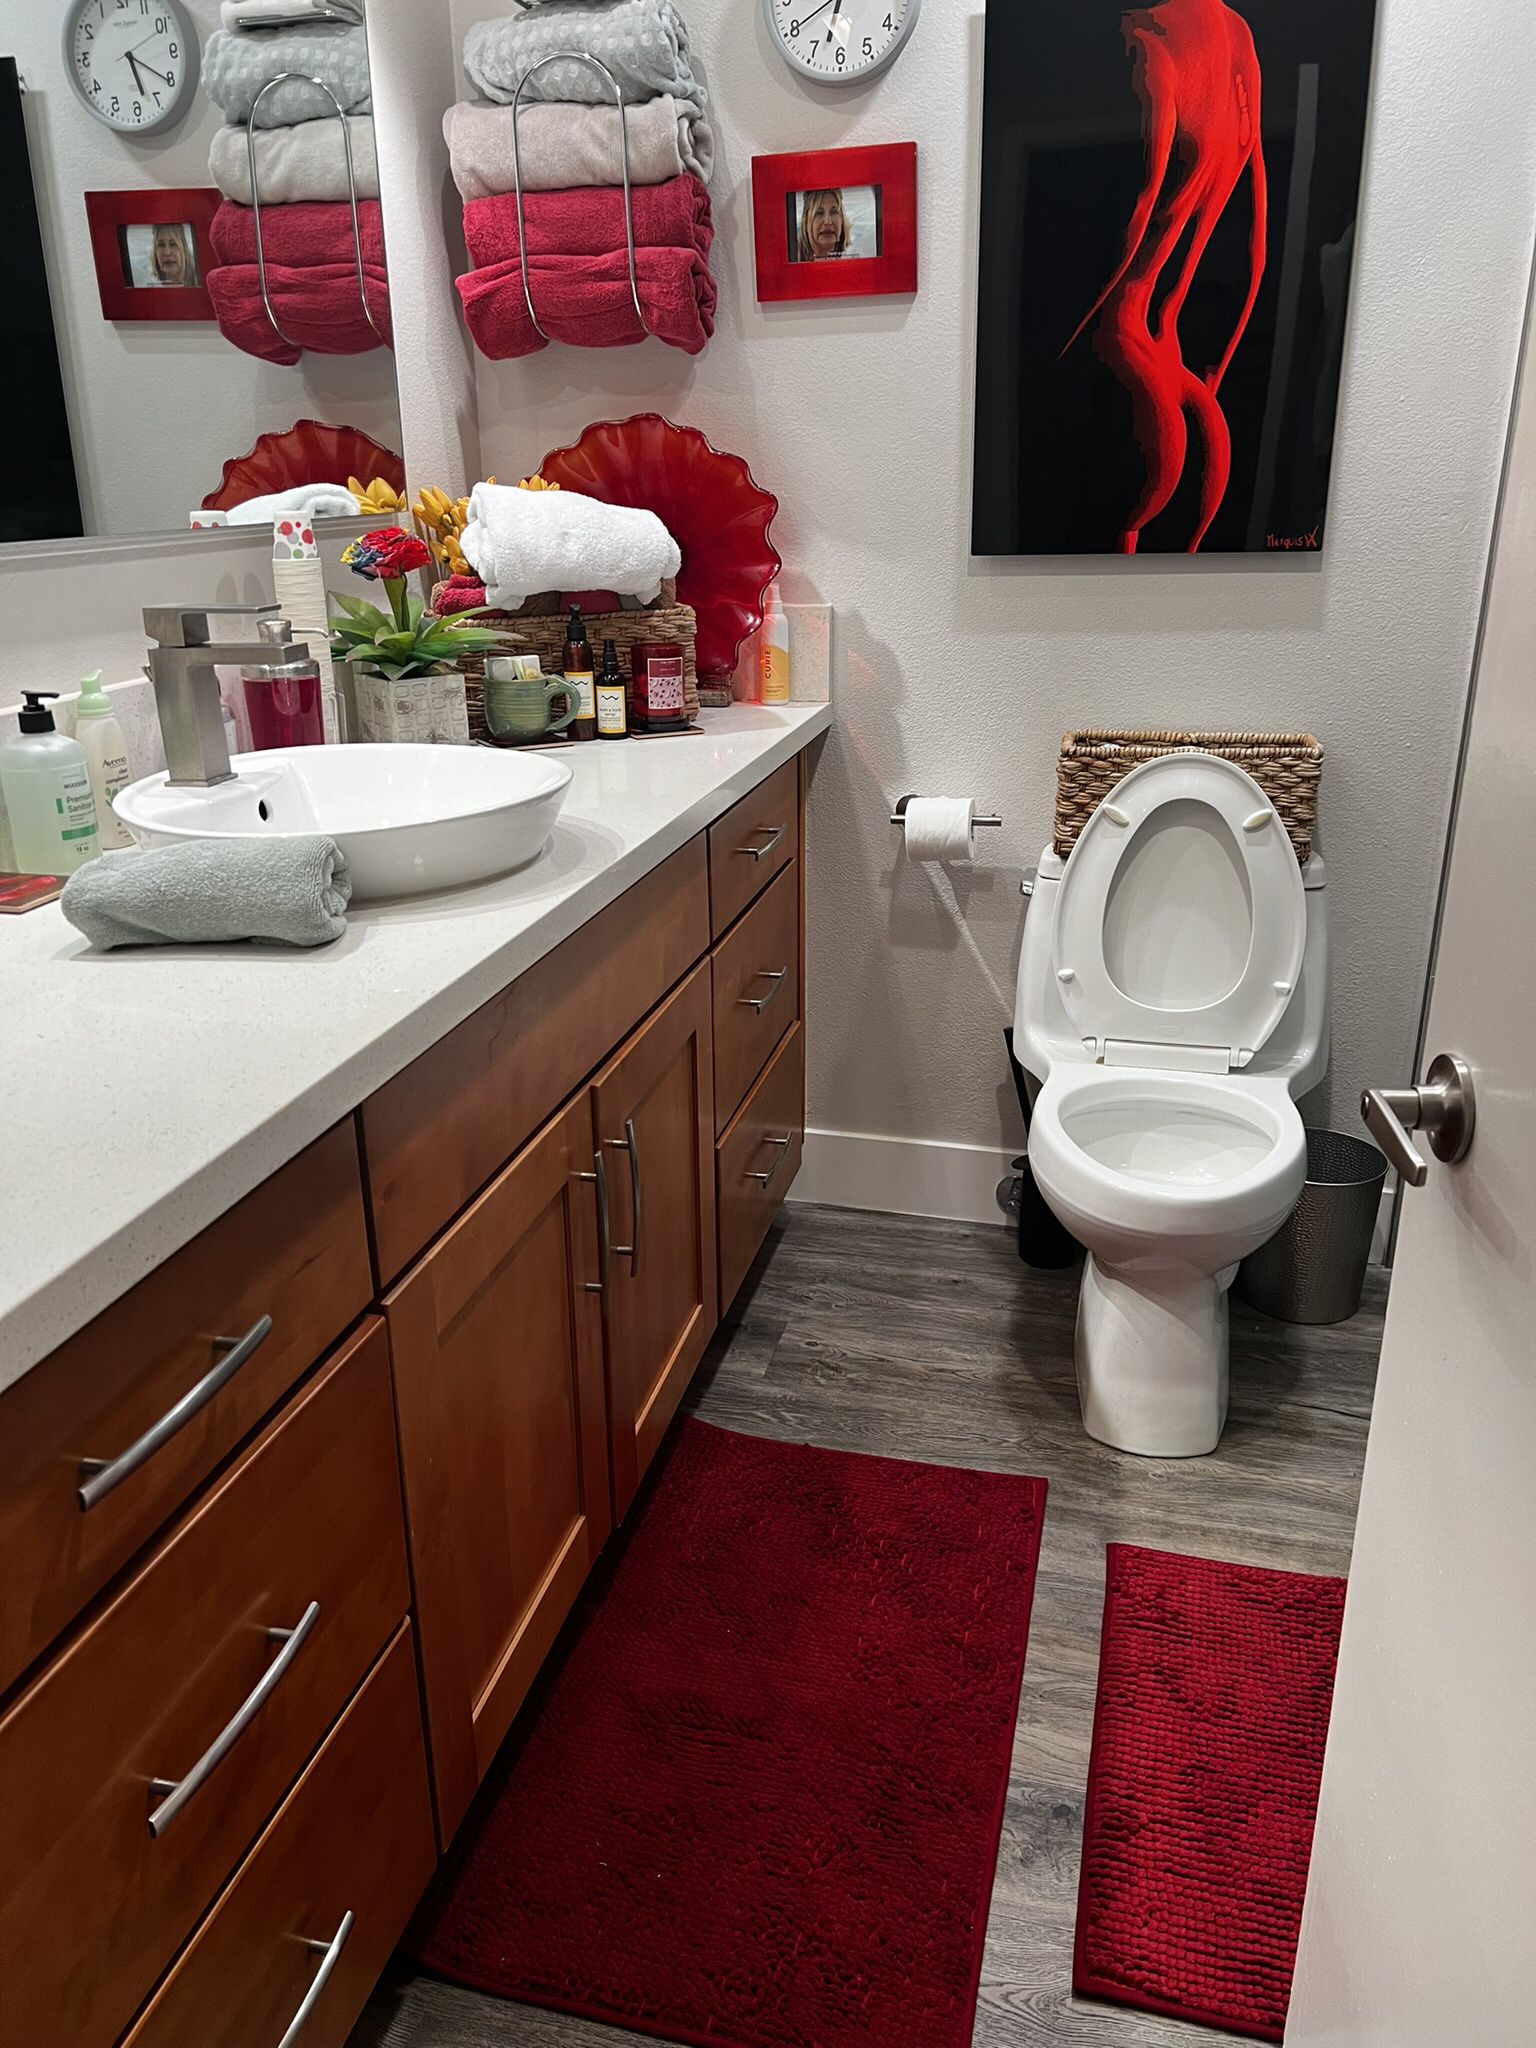 Deep Red Glass & Metal Accessories. Buy My Whole Guest Bathroom! Read Ad For A Deal Or Individual Pricing 